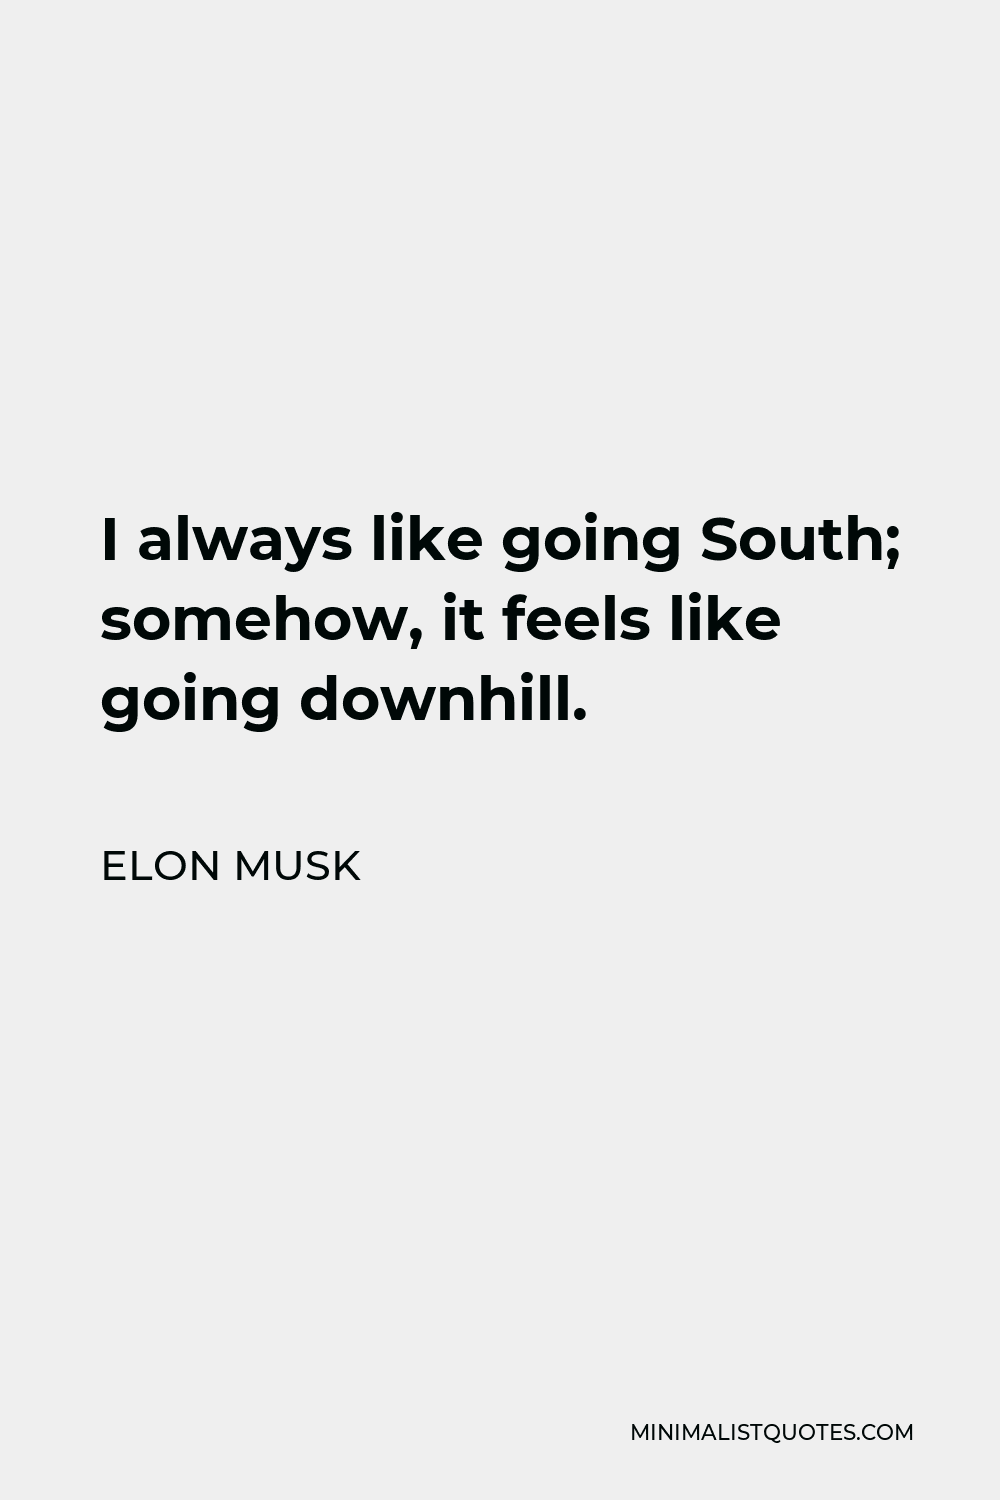 Elon Musk Quote - I always like going South; somehow, it feels like going downhill.